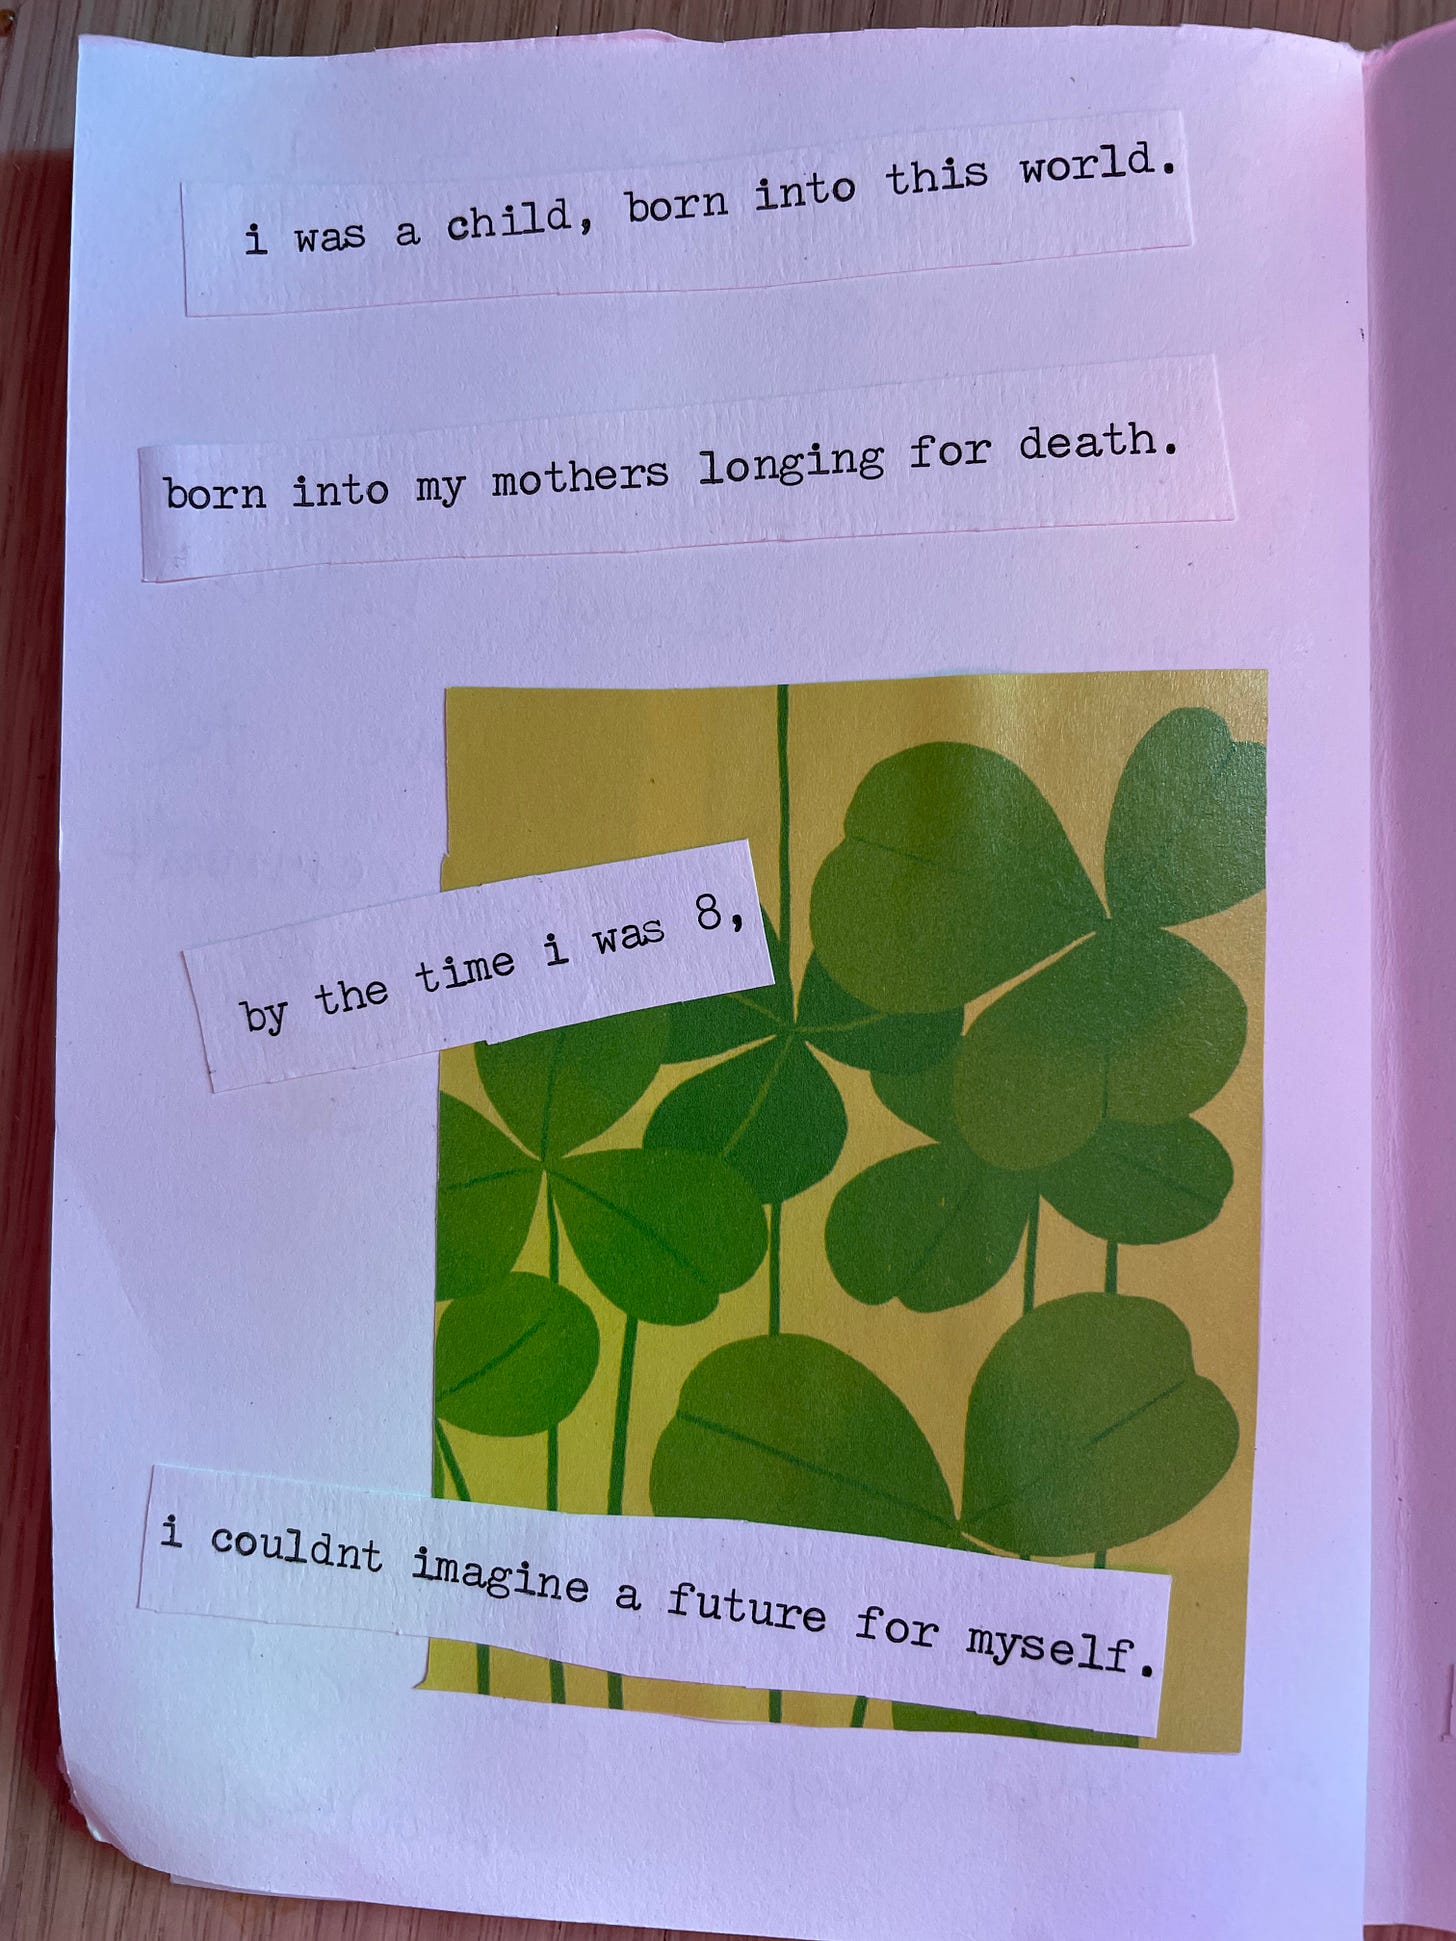 a small green image of clover on a white paper. text says I was a child born into this world. born into my mothers longing for death. by the time I was 8, I couldn't imagine a future for myself. 